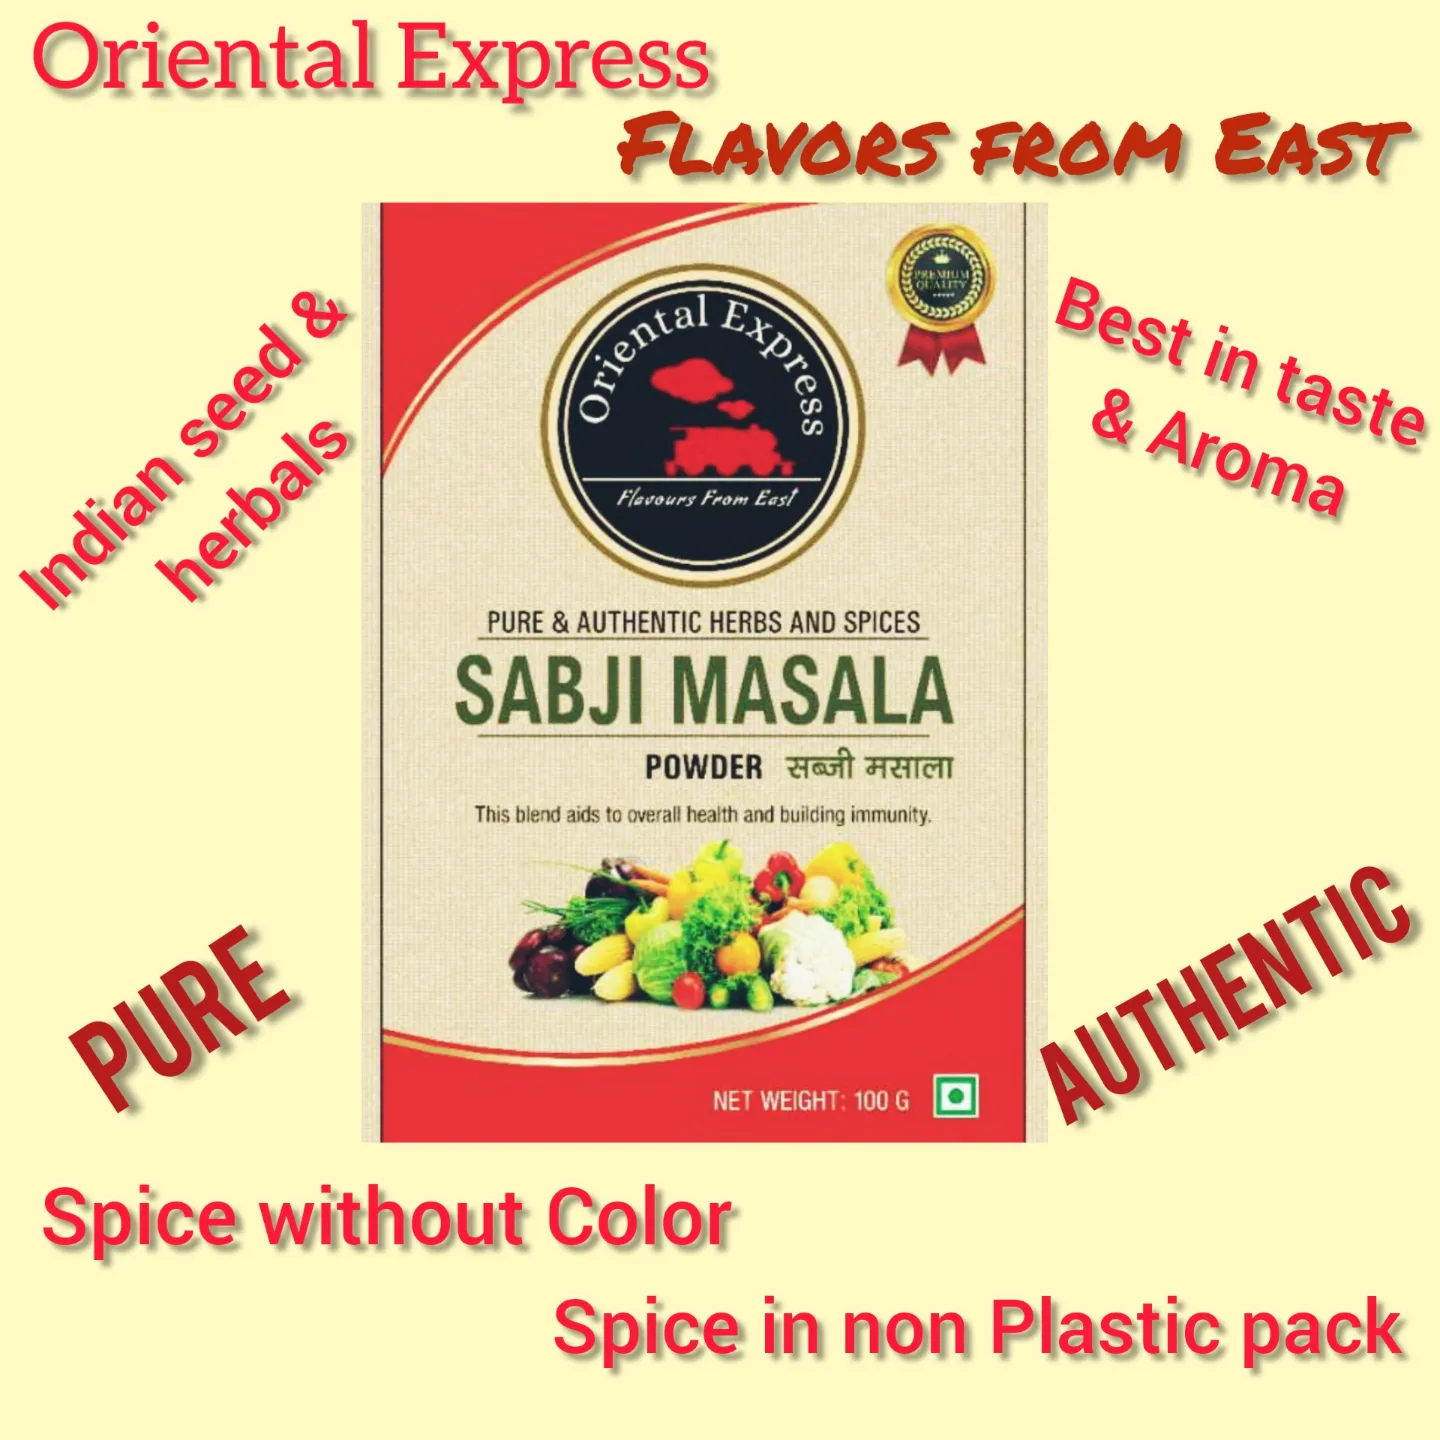 Post image Oriental Express Masale - Pure and Authentic 
Masale, Chai, Besan, Sattu 
Order now @8409696726 free shipping